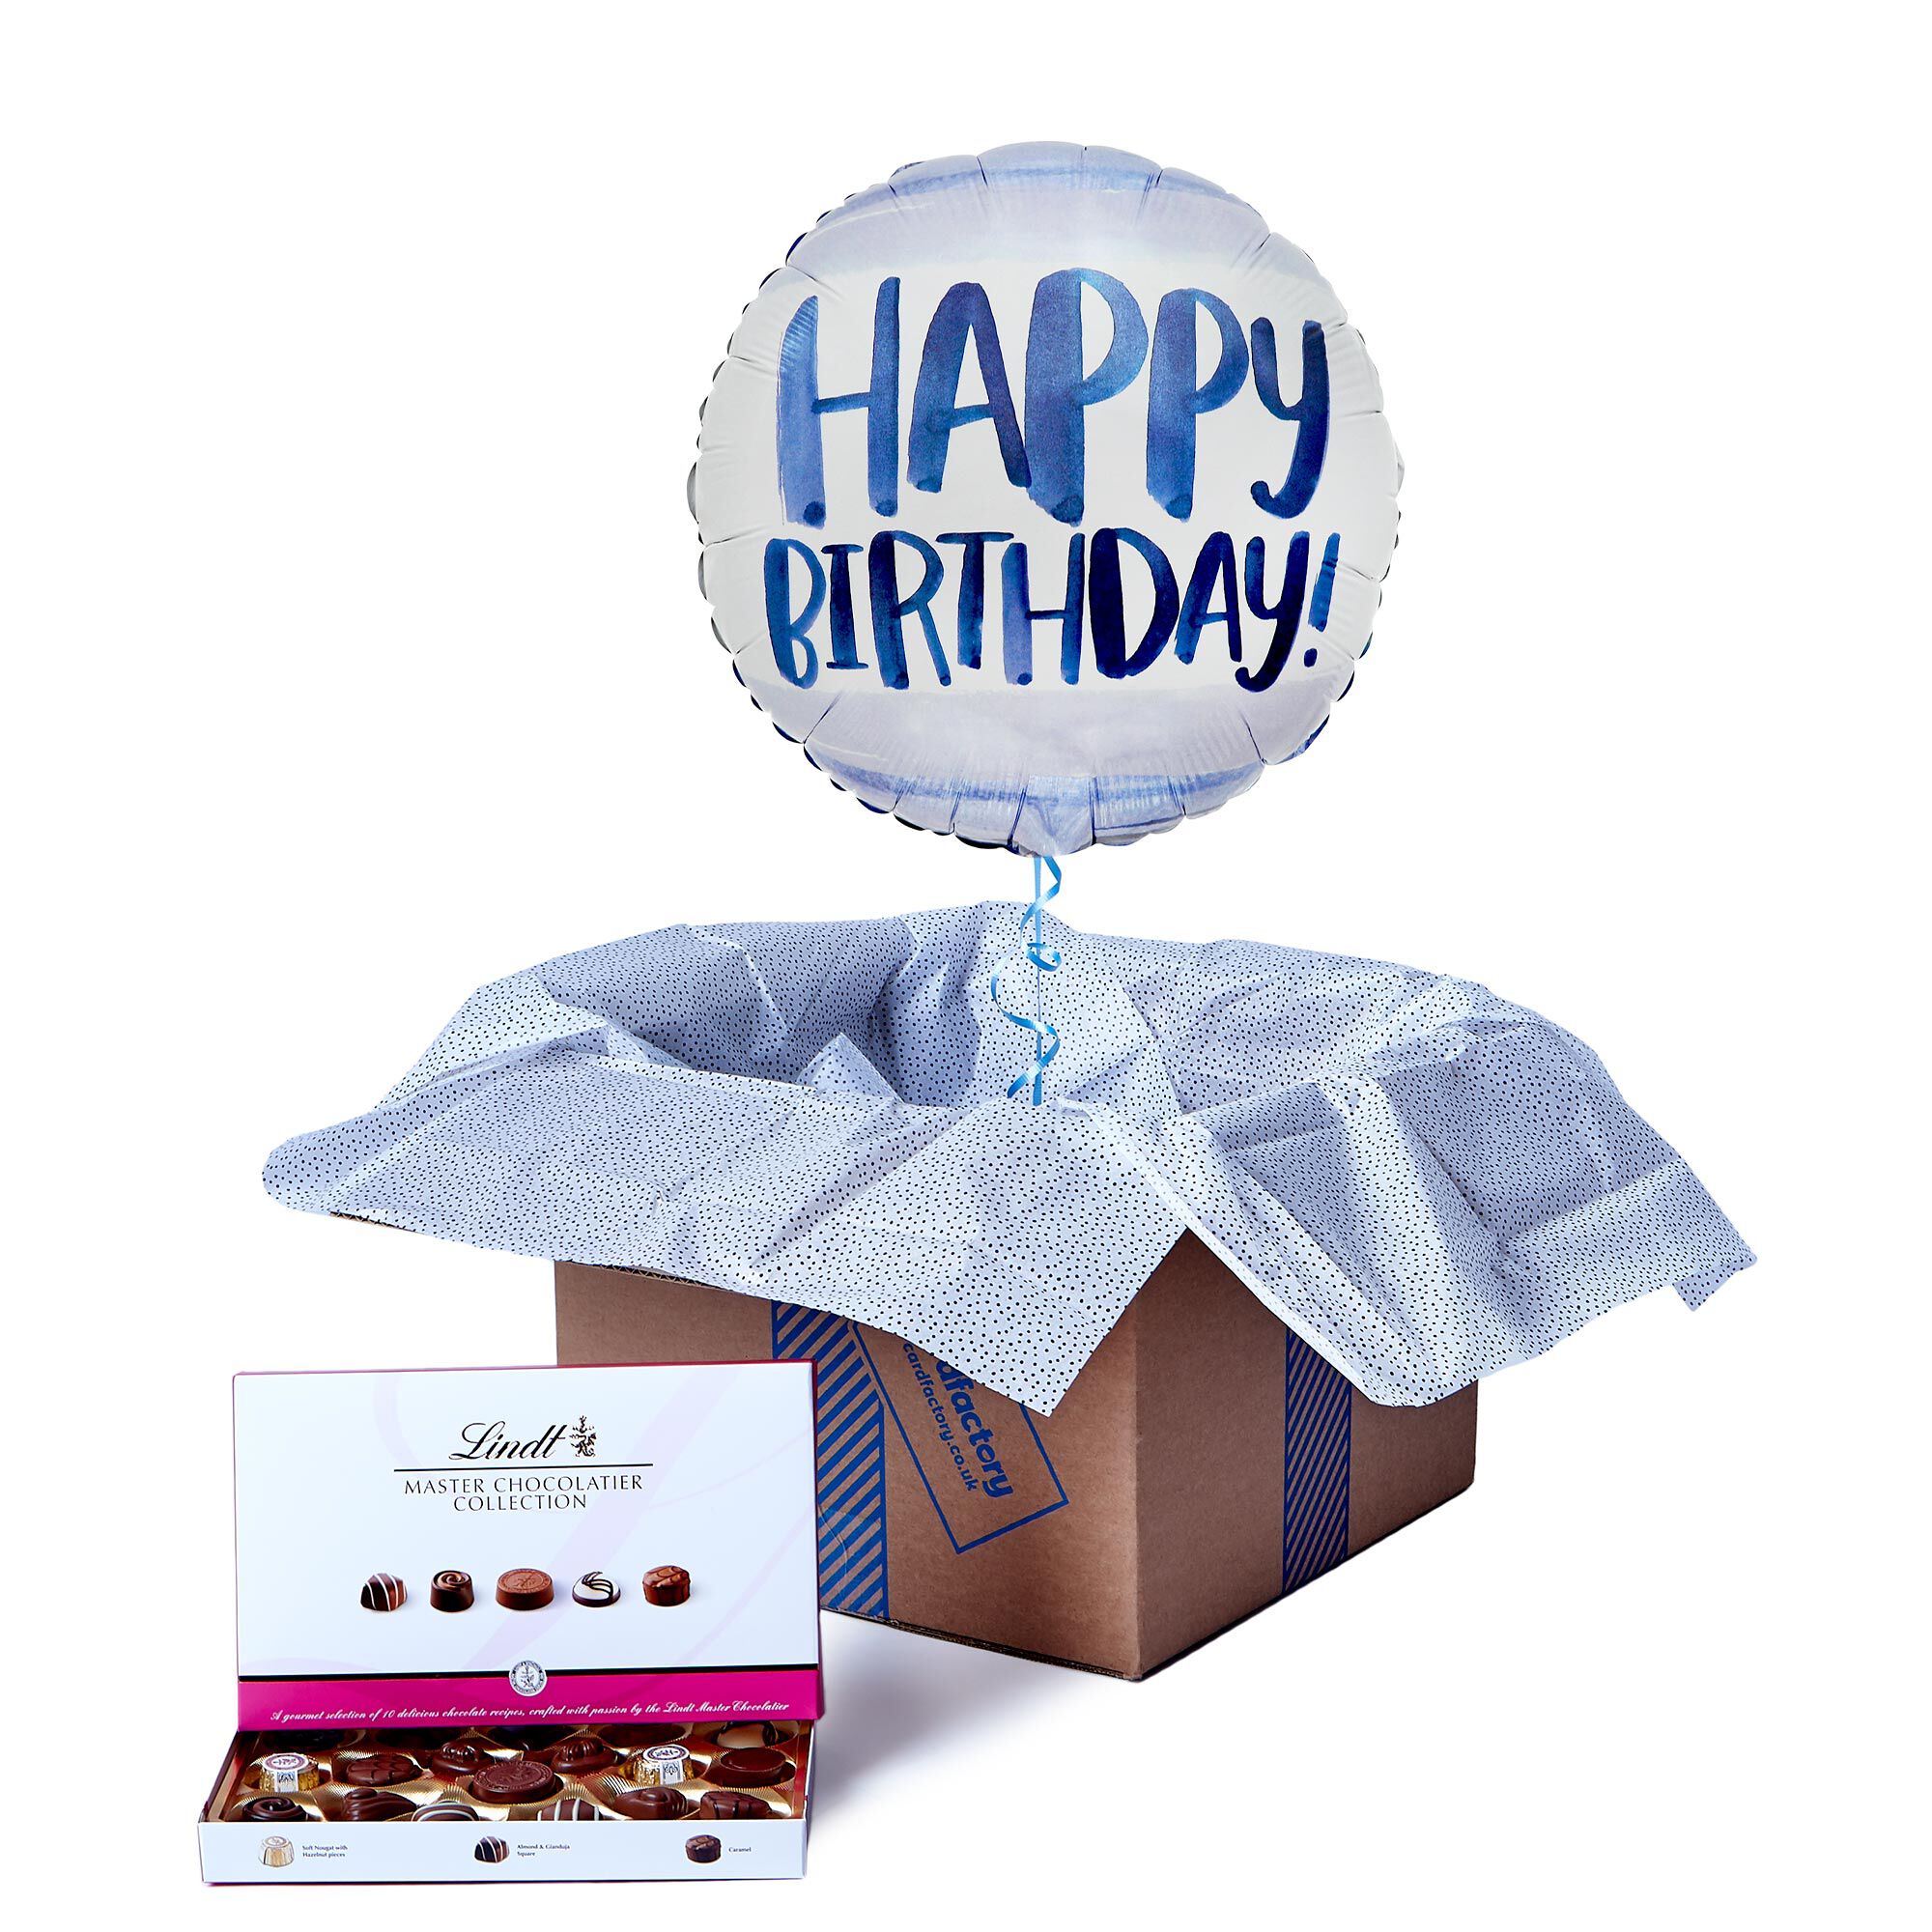 Balloon Bouquets, Birthday Balloon Delivery UK, Helium Balloons in a Box |  Card Factory